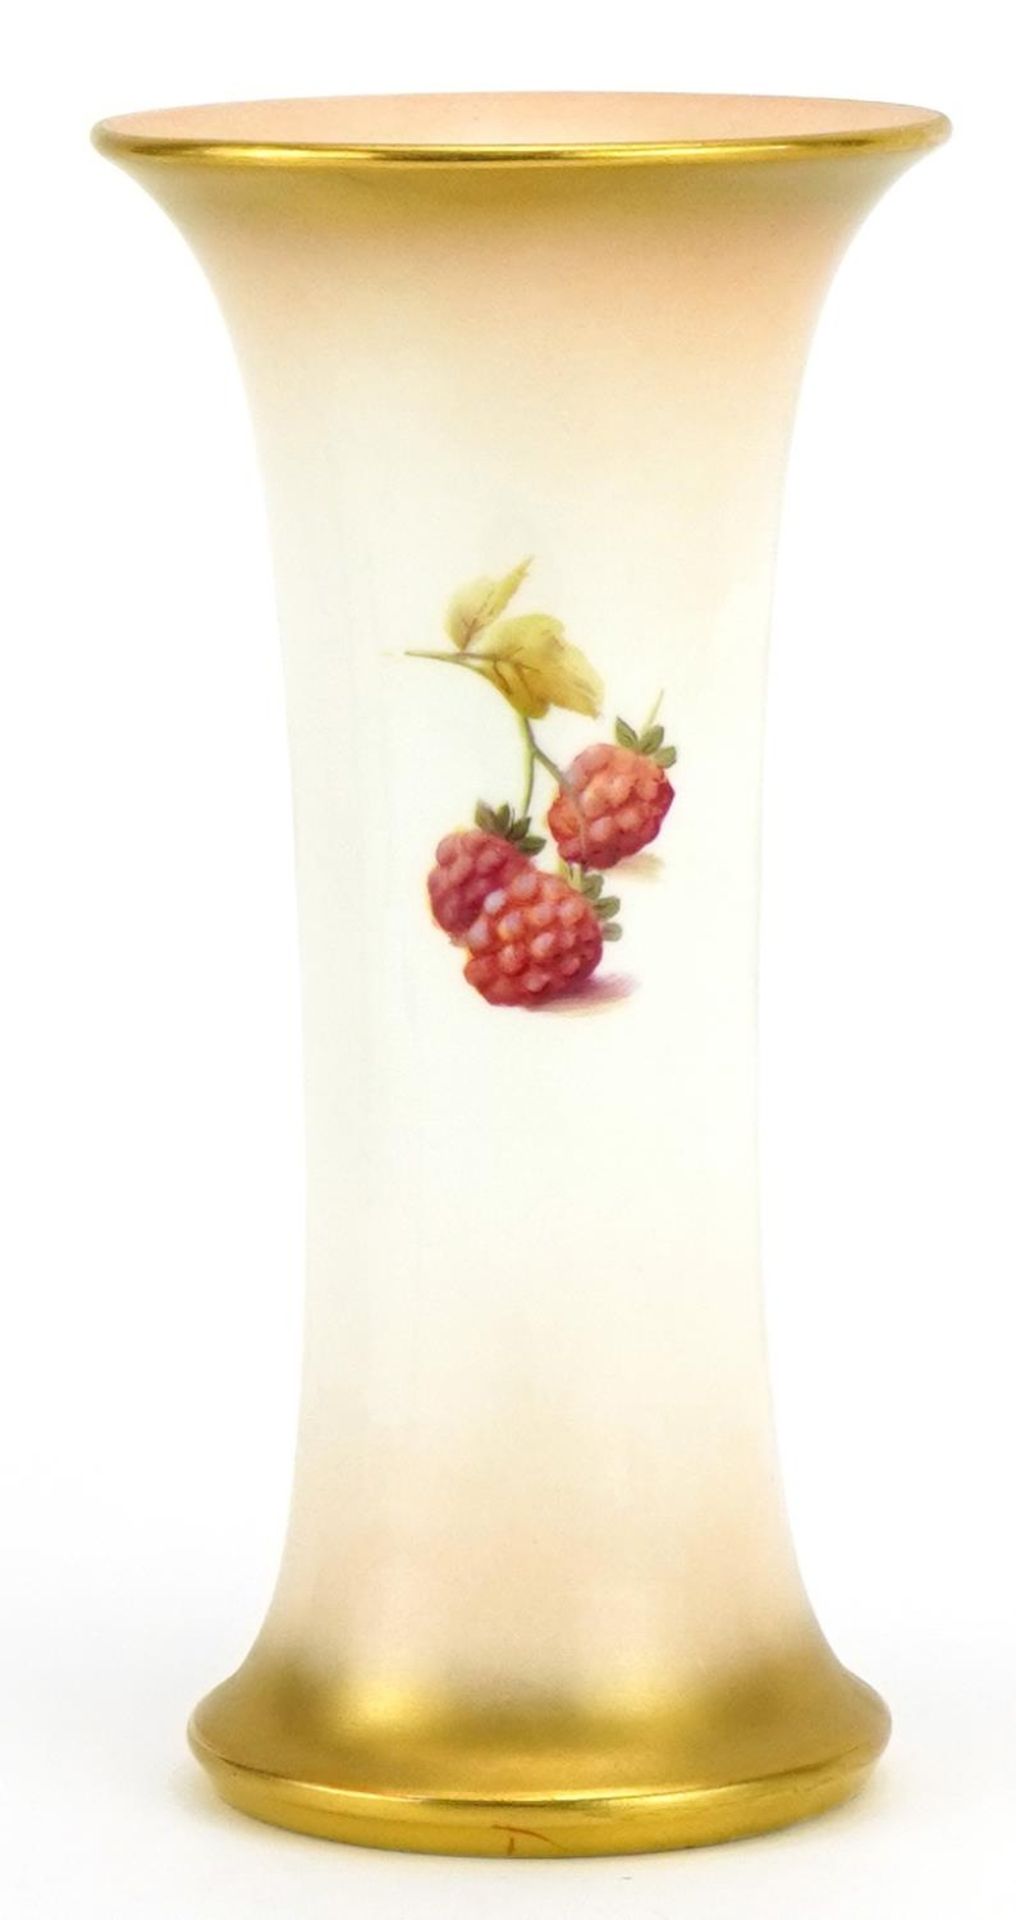 Horace Price for Royal Worcester, porcelain trumpet vase hand painted with fruit and berries, - Image 3 of 5